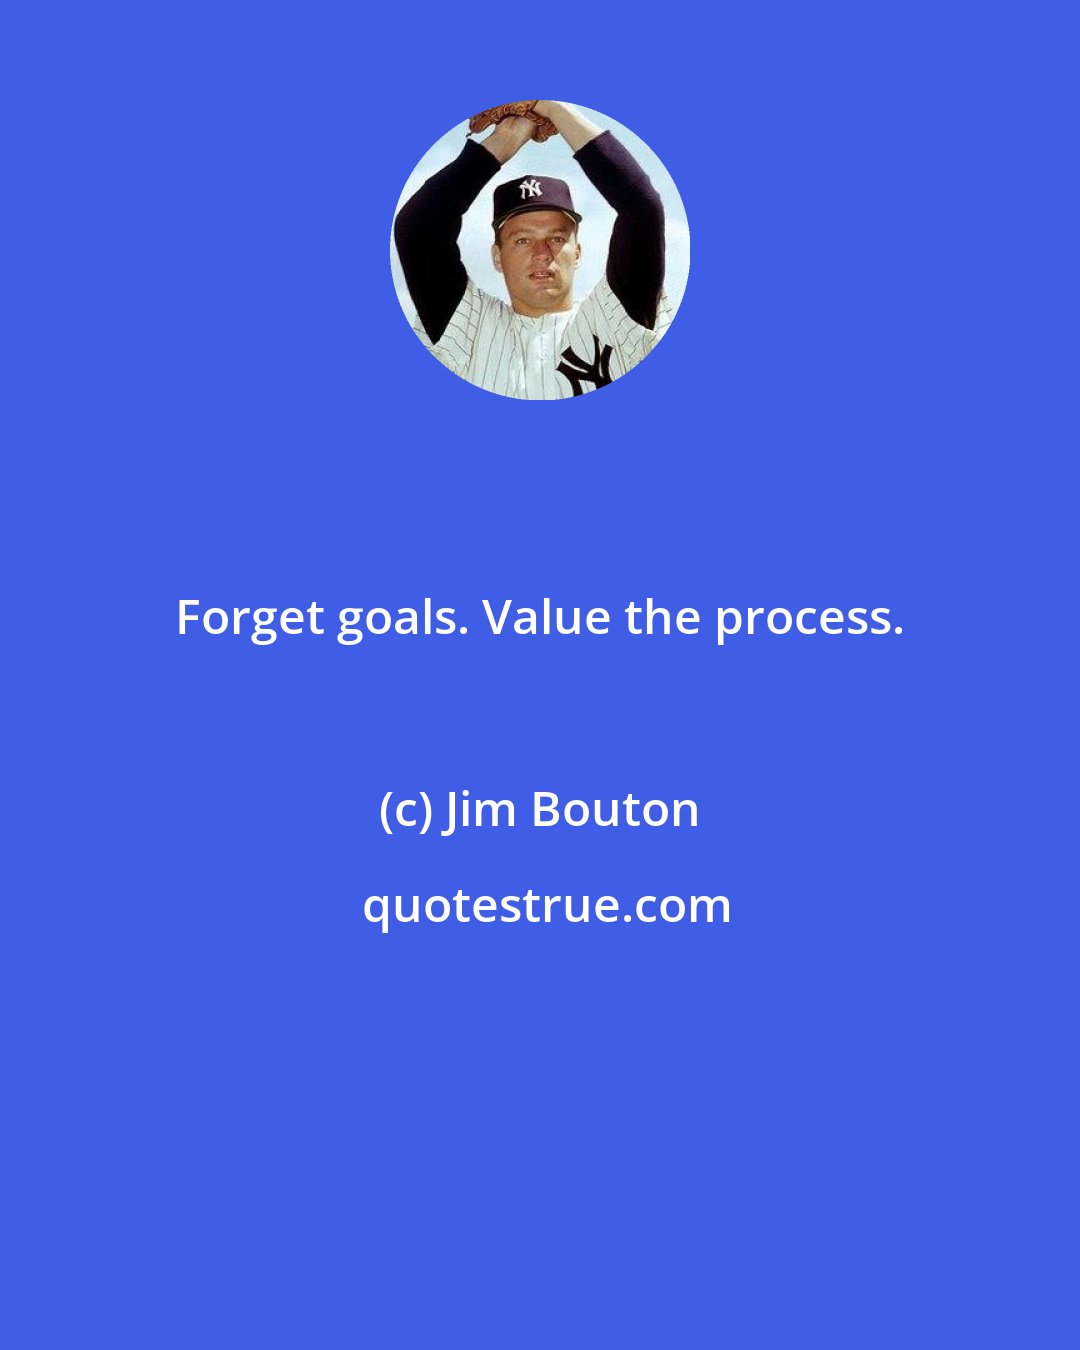 Jim Bouton: Forget goals. Value the process.